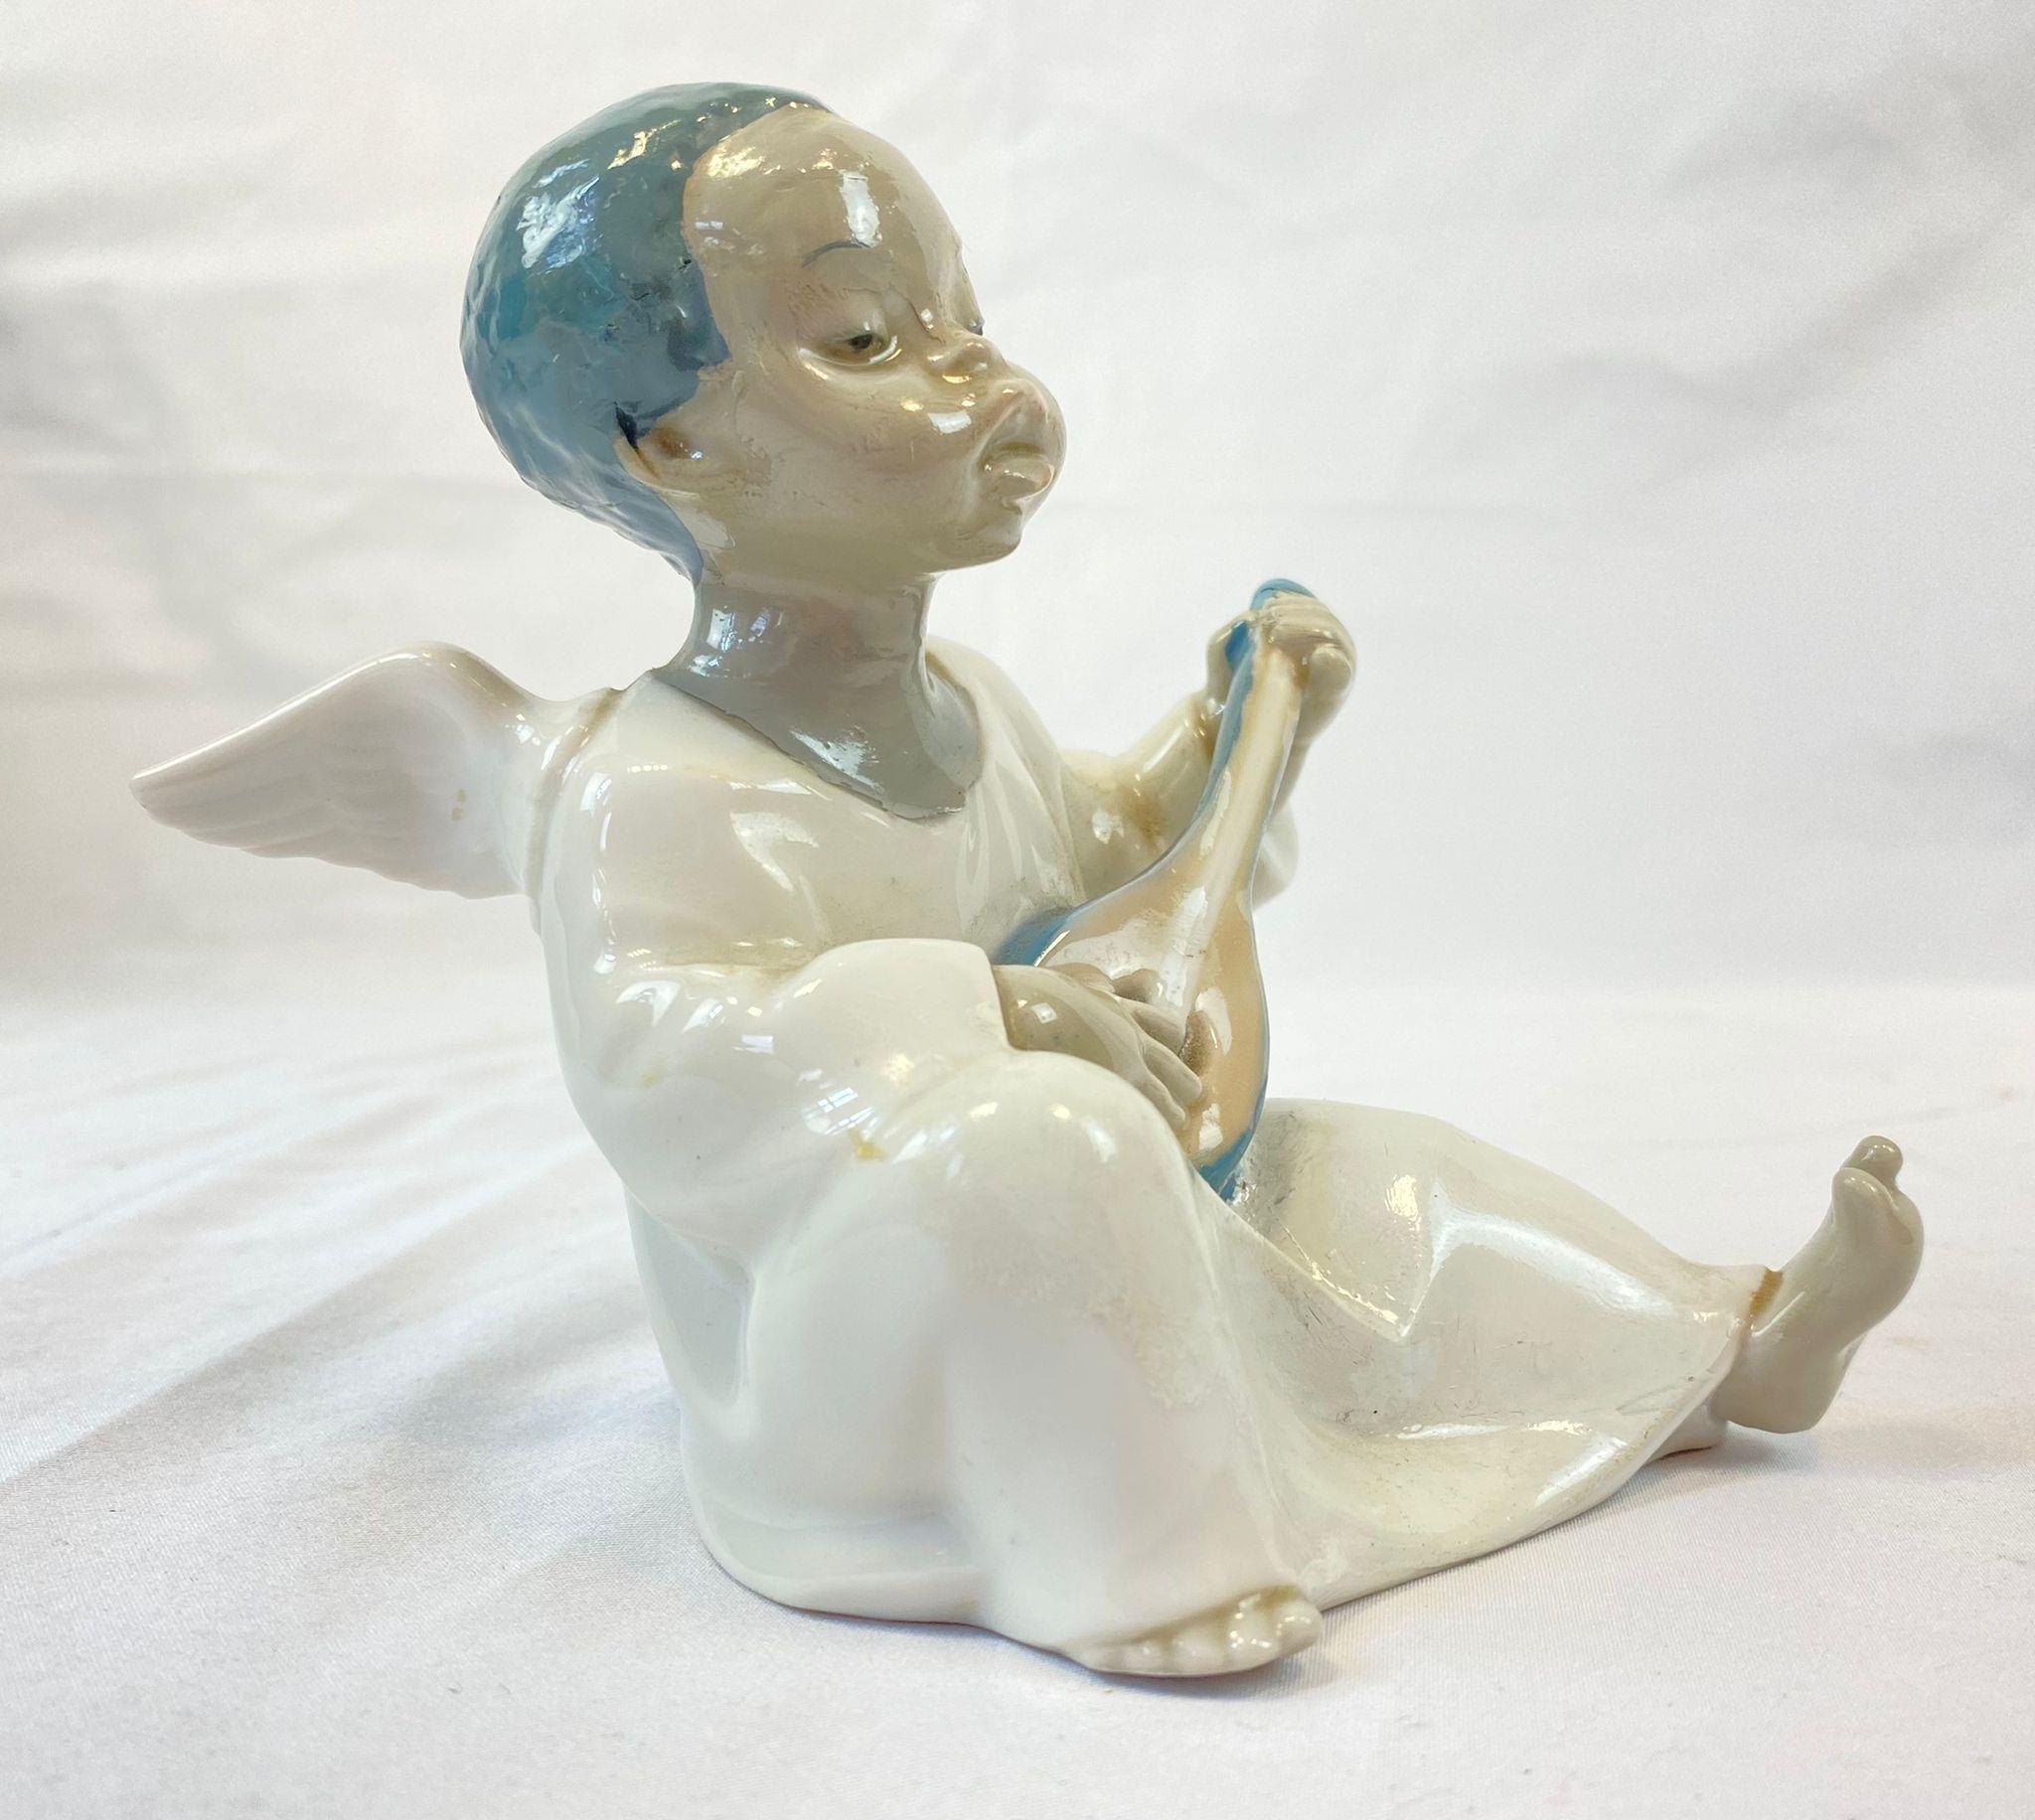 A Lladro figure of a sitting, black boy angel. Hand made in Spain. Height: 11 cm.